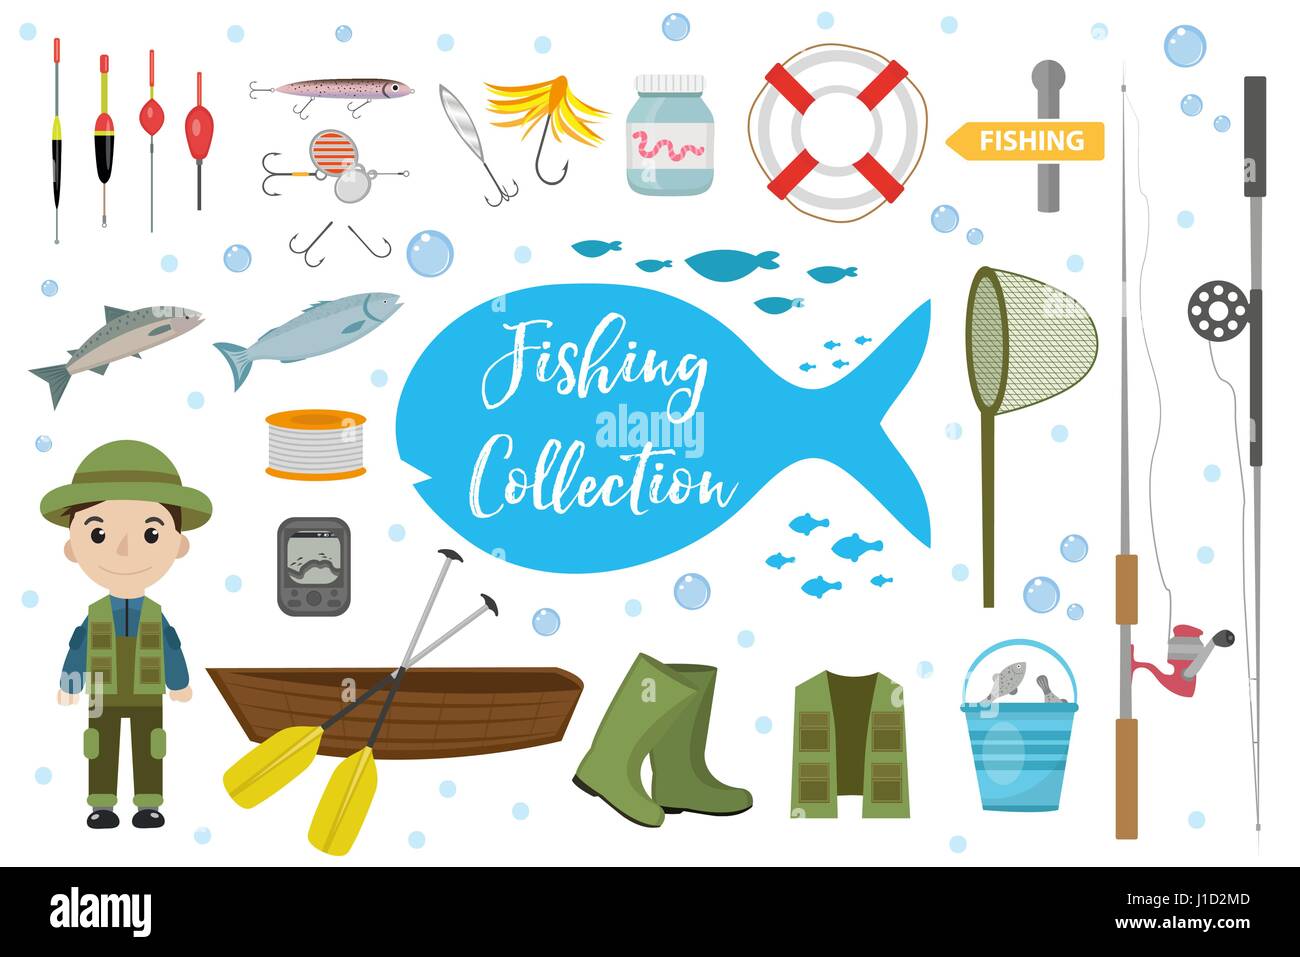 Fishing icon set, flat, cartoon style. Fishery collection objects